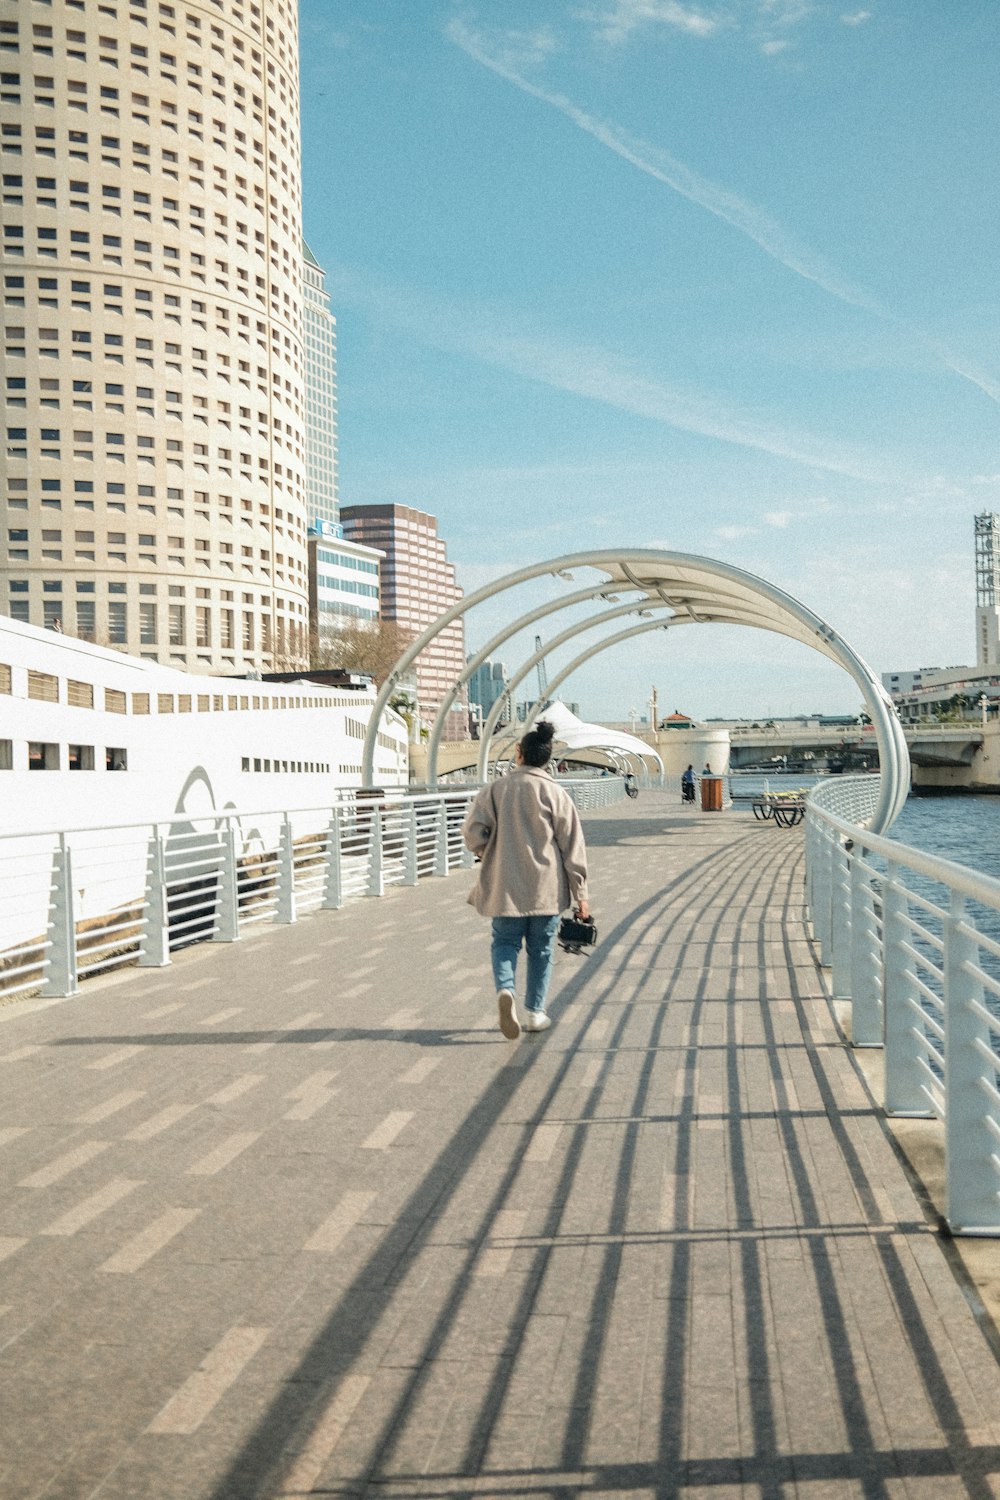 a woman walking down a walkway next to a body of water